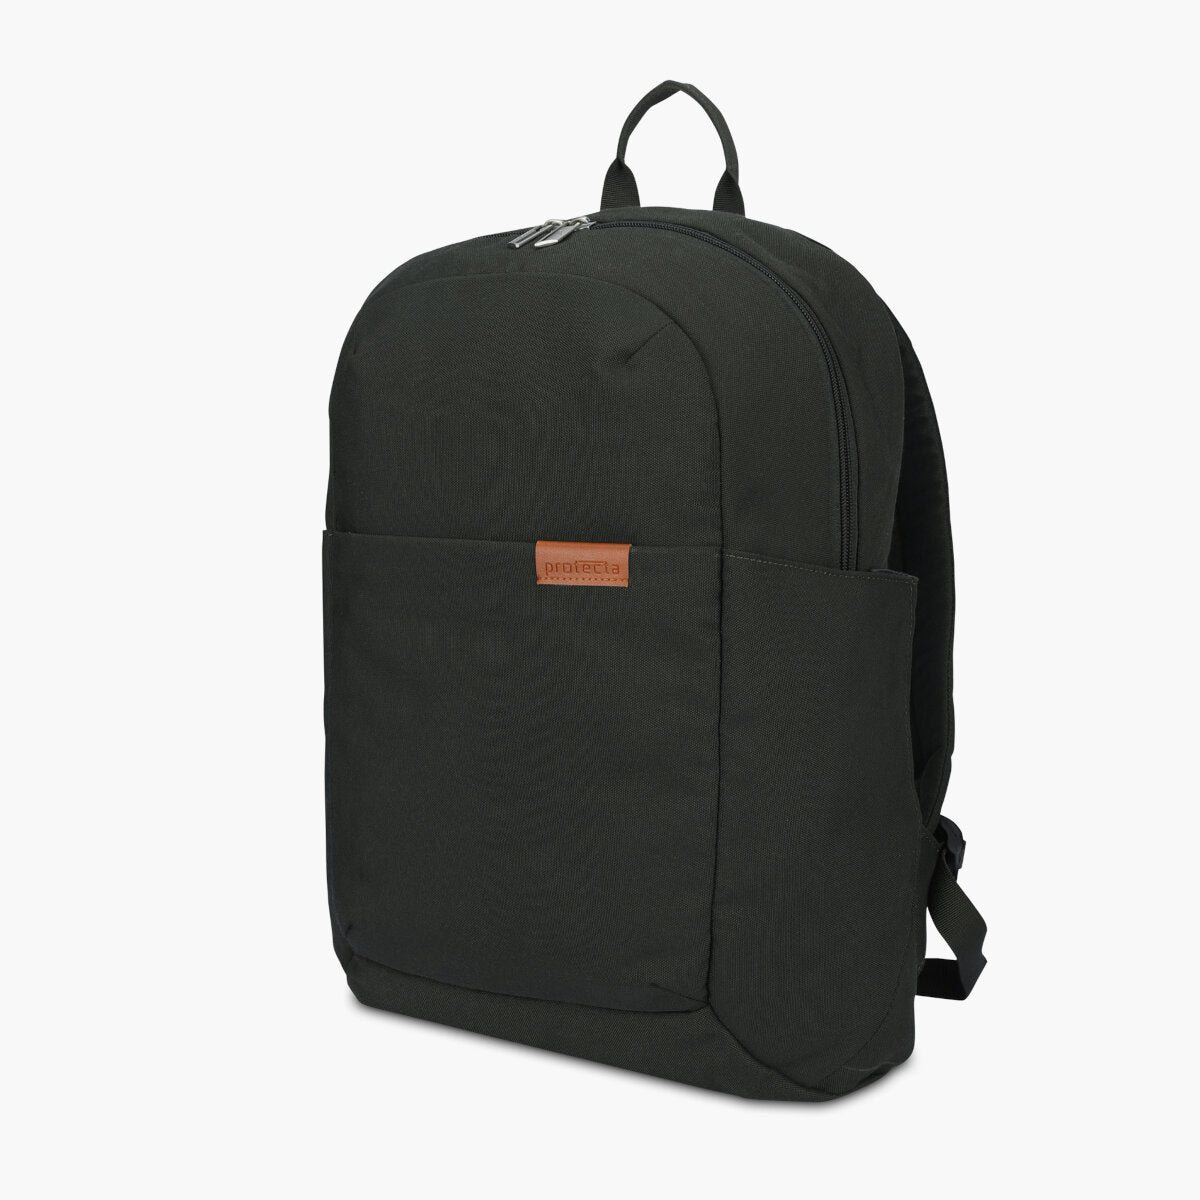 Green | Protecta Strong Buzz Laptop Backpack - 4